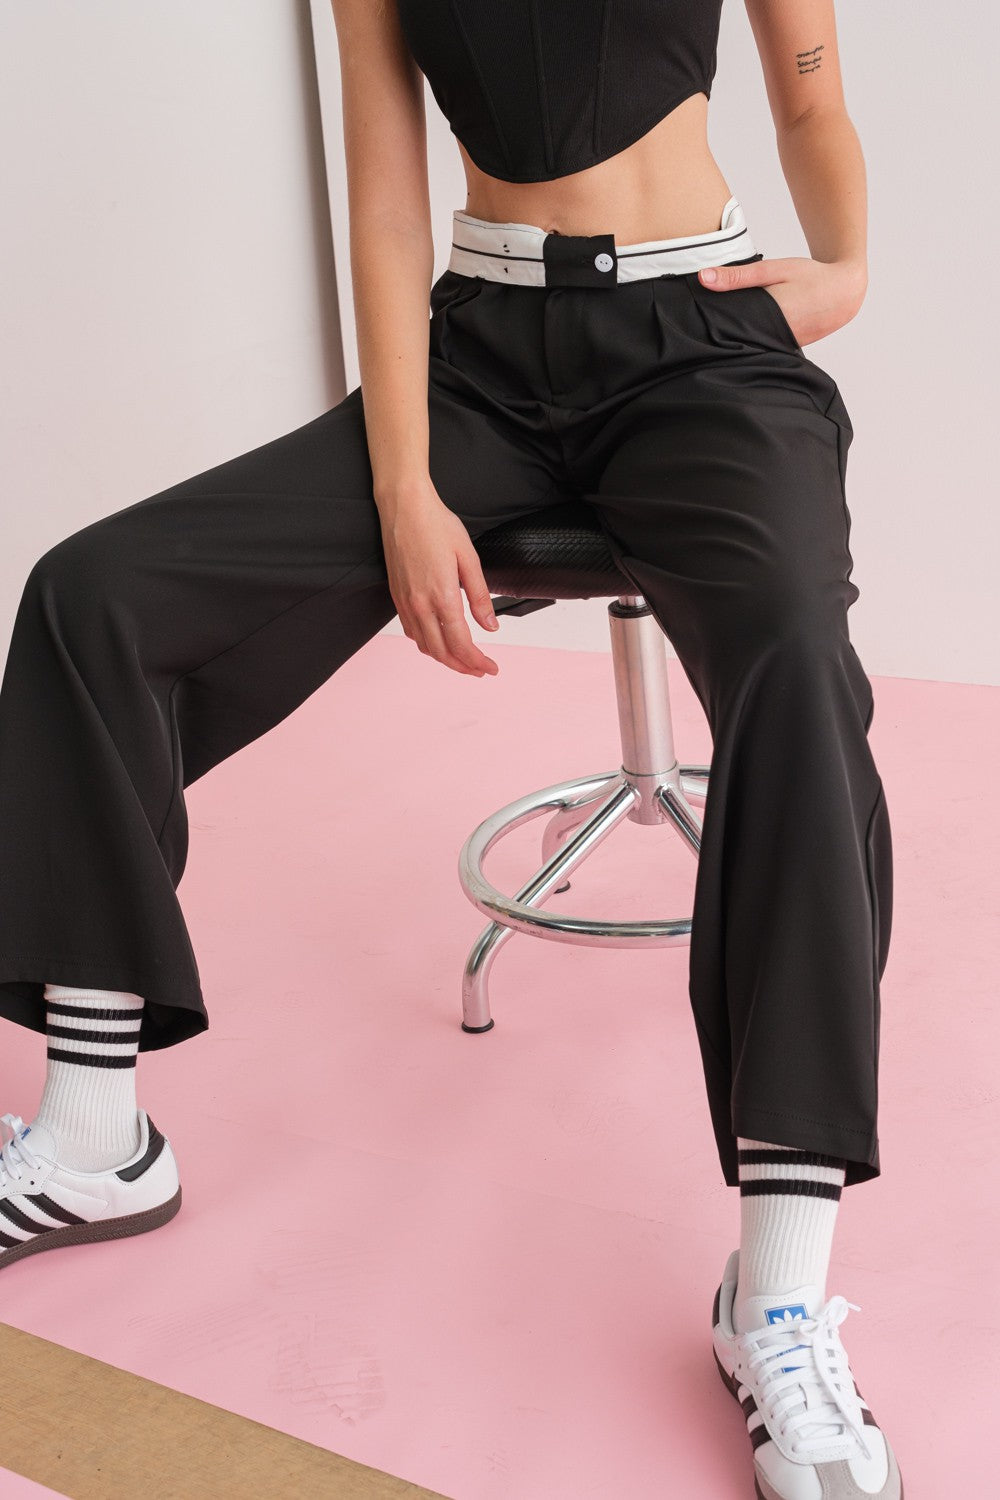 The Diana Wide Leg Pants are designed to provide an effortless, comfortable look. Crafted from a blend of 95% polyester and 5% spandex, these pants boast an elastic waist, high waistline, and two convenient front pockets. The addition of the wide leg allows for more freedom of movement, distinguishing them from traditional skinny leg pants.